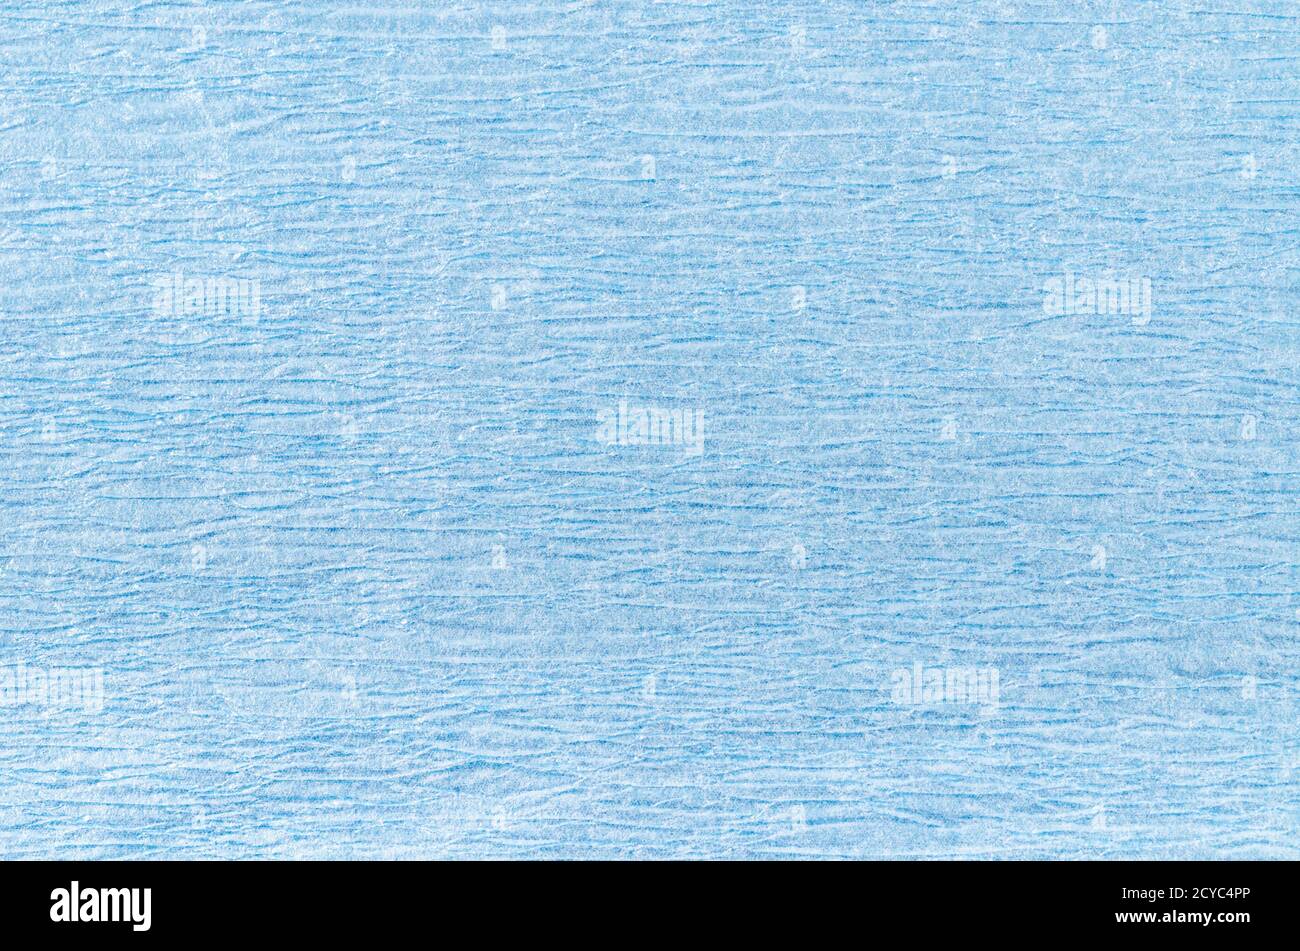 Abstract light blue korean traditional paper texture with small glitters. Stock Photo